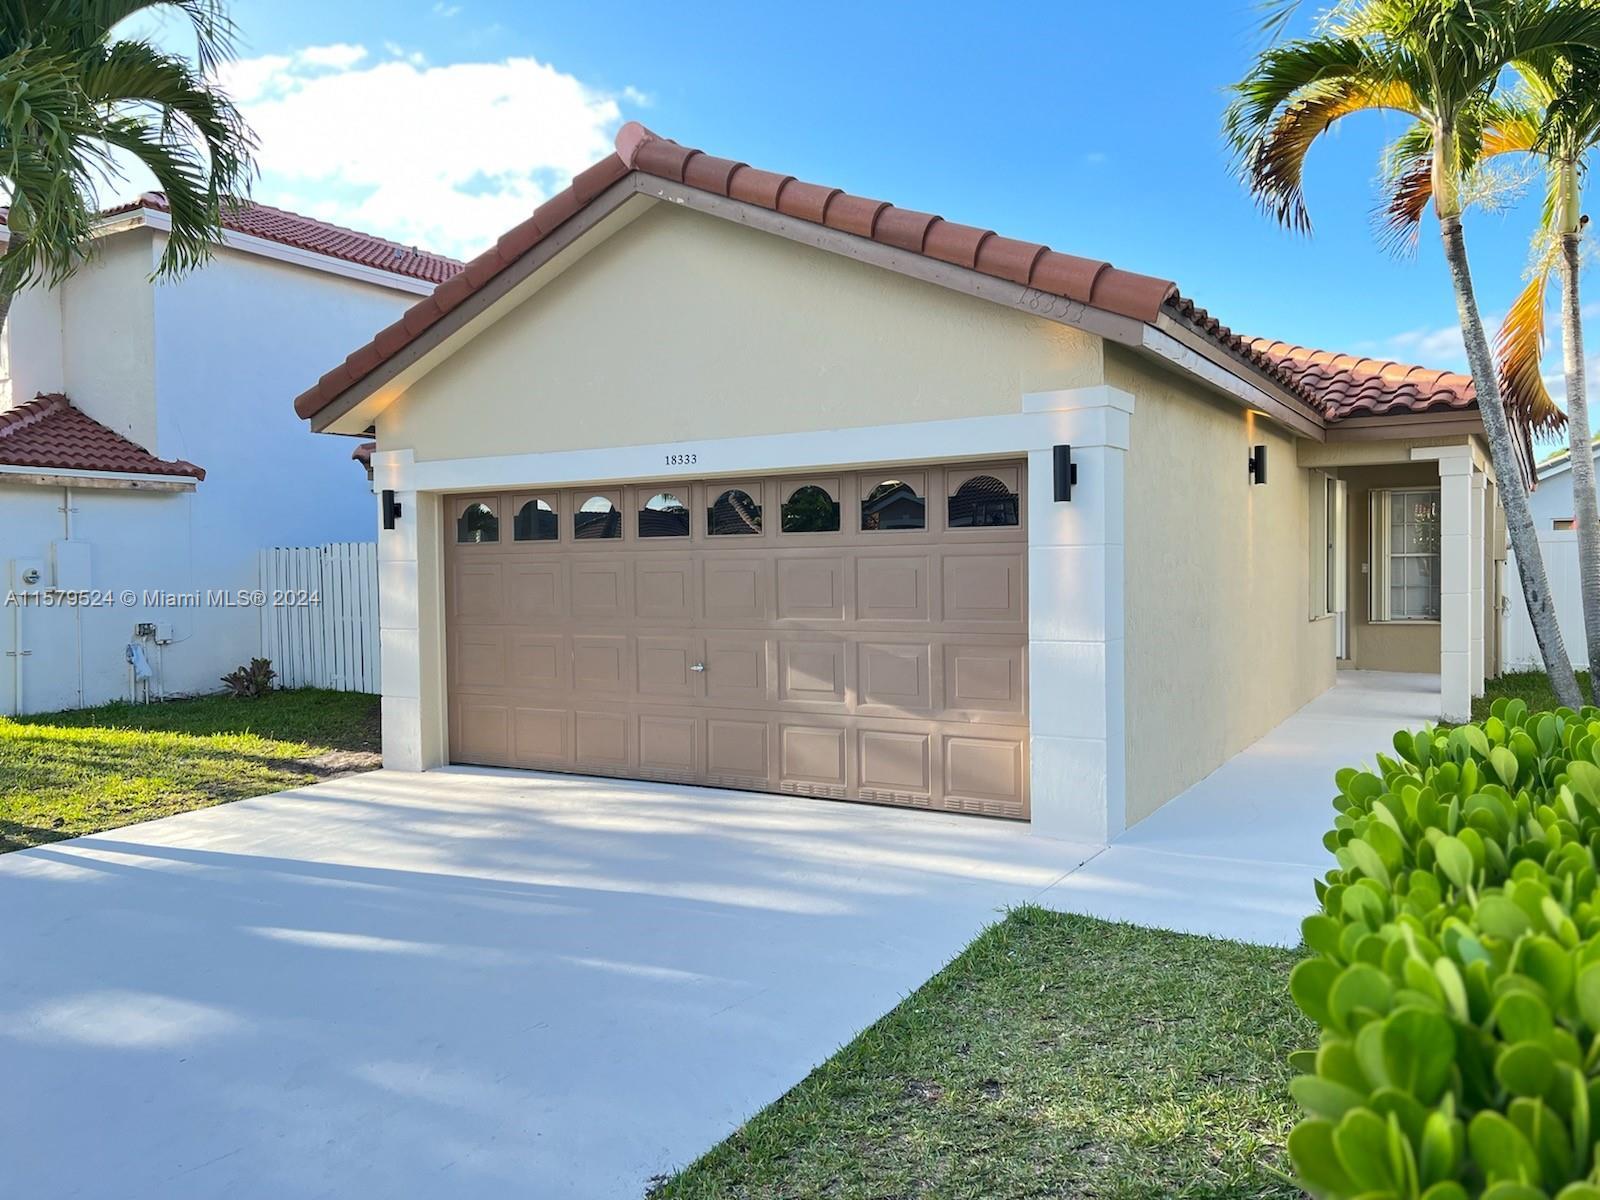 Photo of 18333 NW 7th St in Pembroke Pines, FL